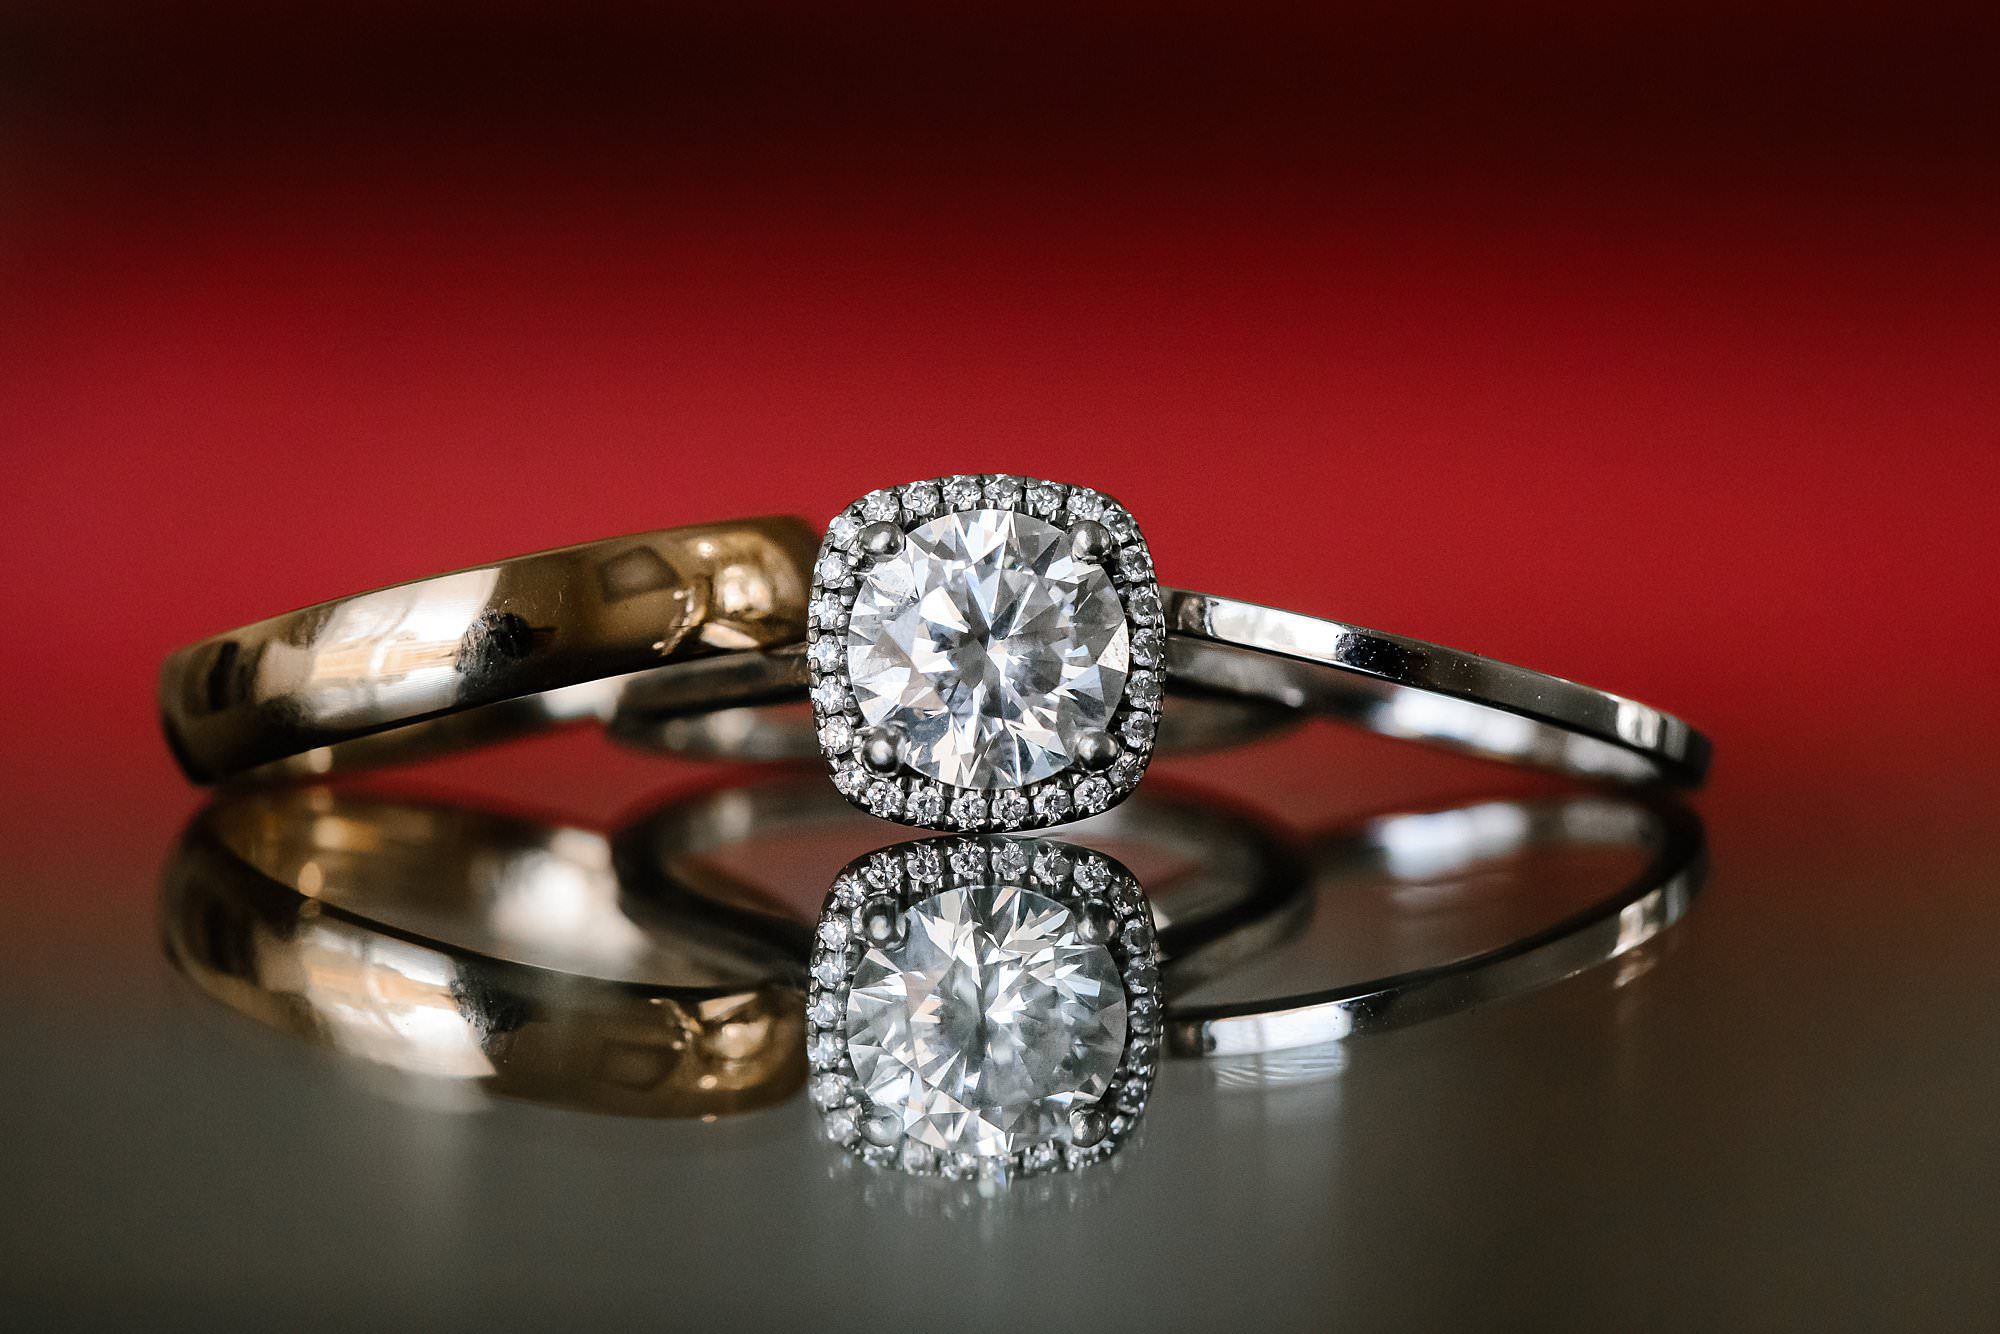 Diamond engagement ring and wedding bands reflected on a table